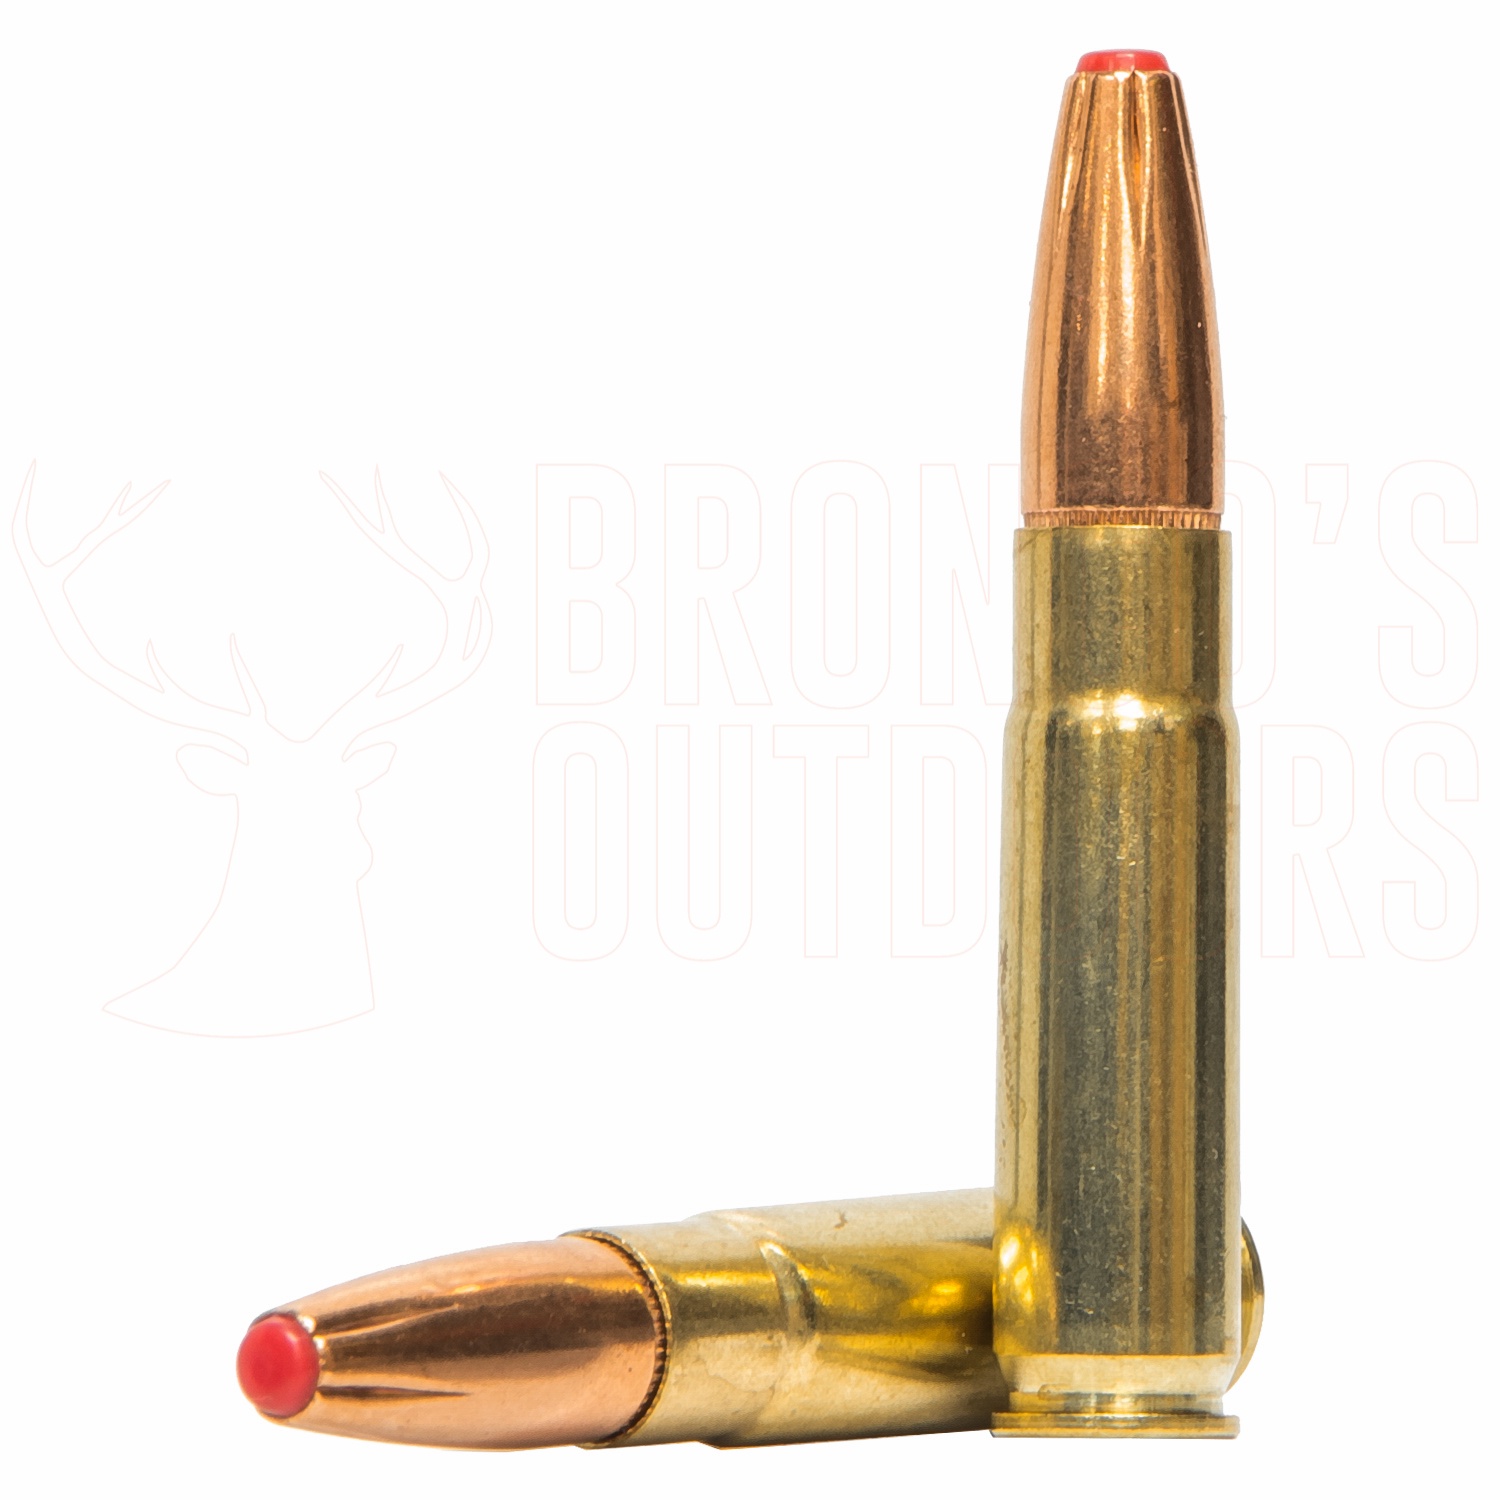 hornady black 300 blackout subsonic in stock